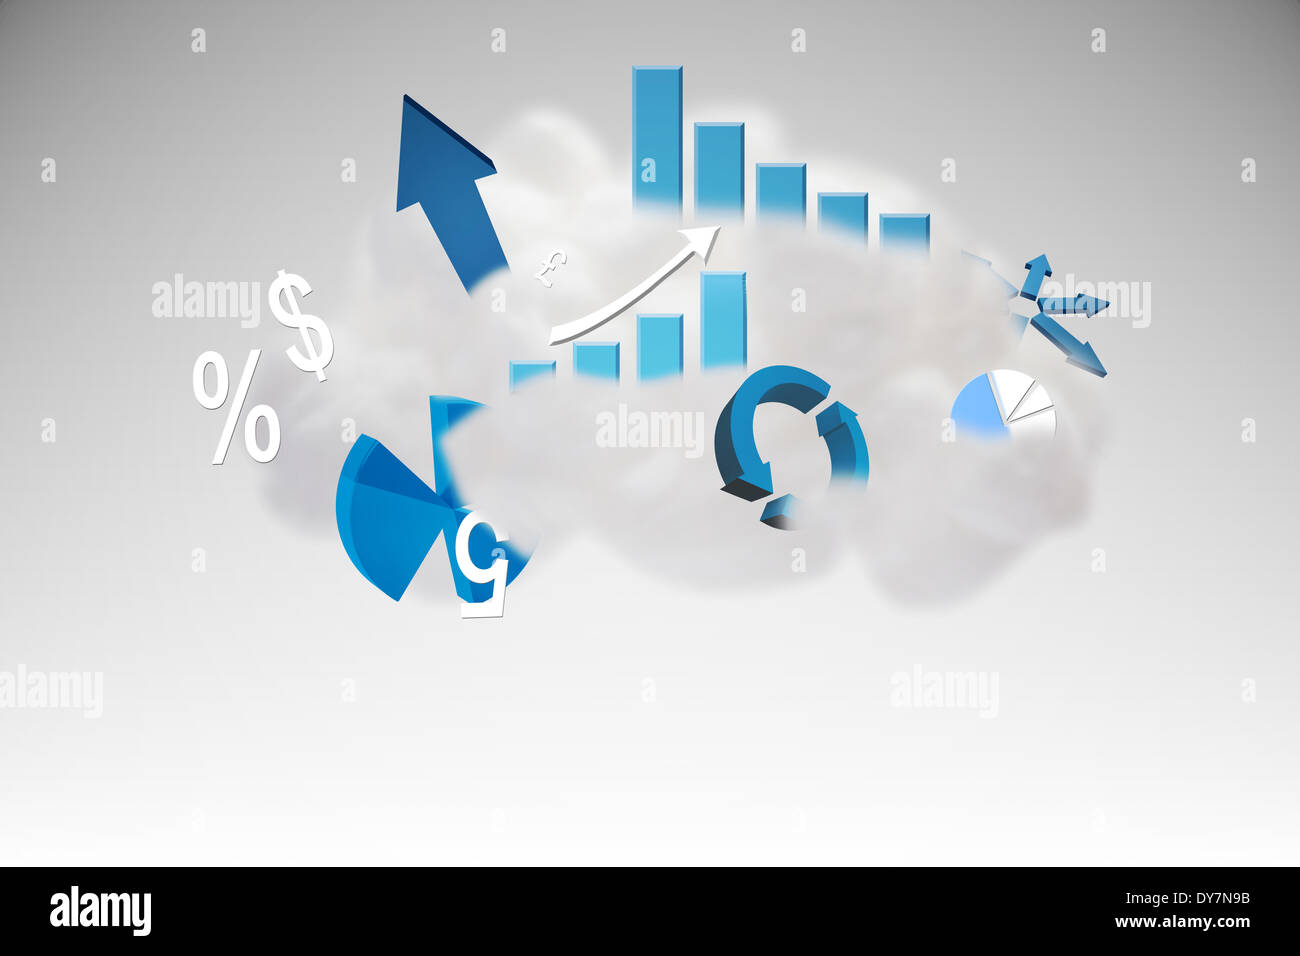 Cloud computing graphic with graphs Stock Photo